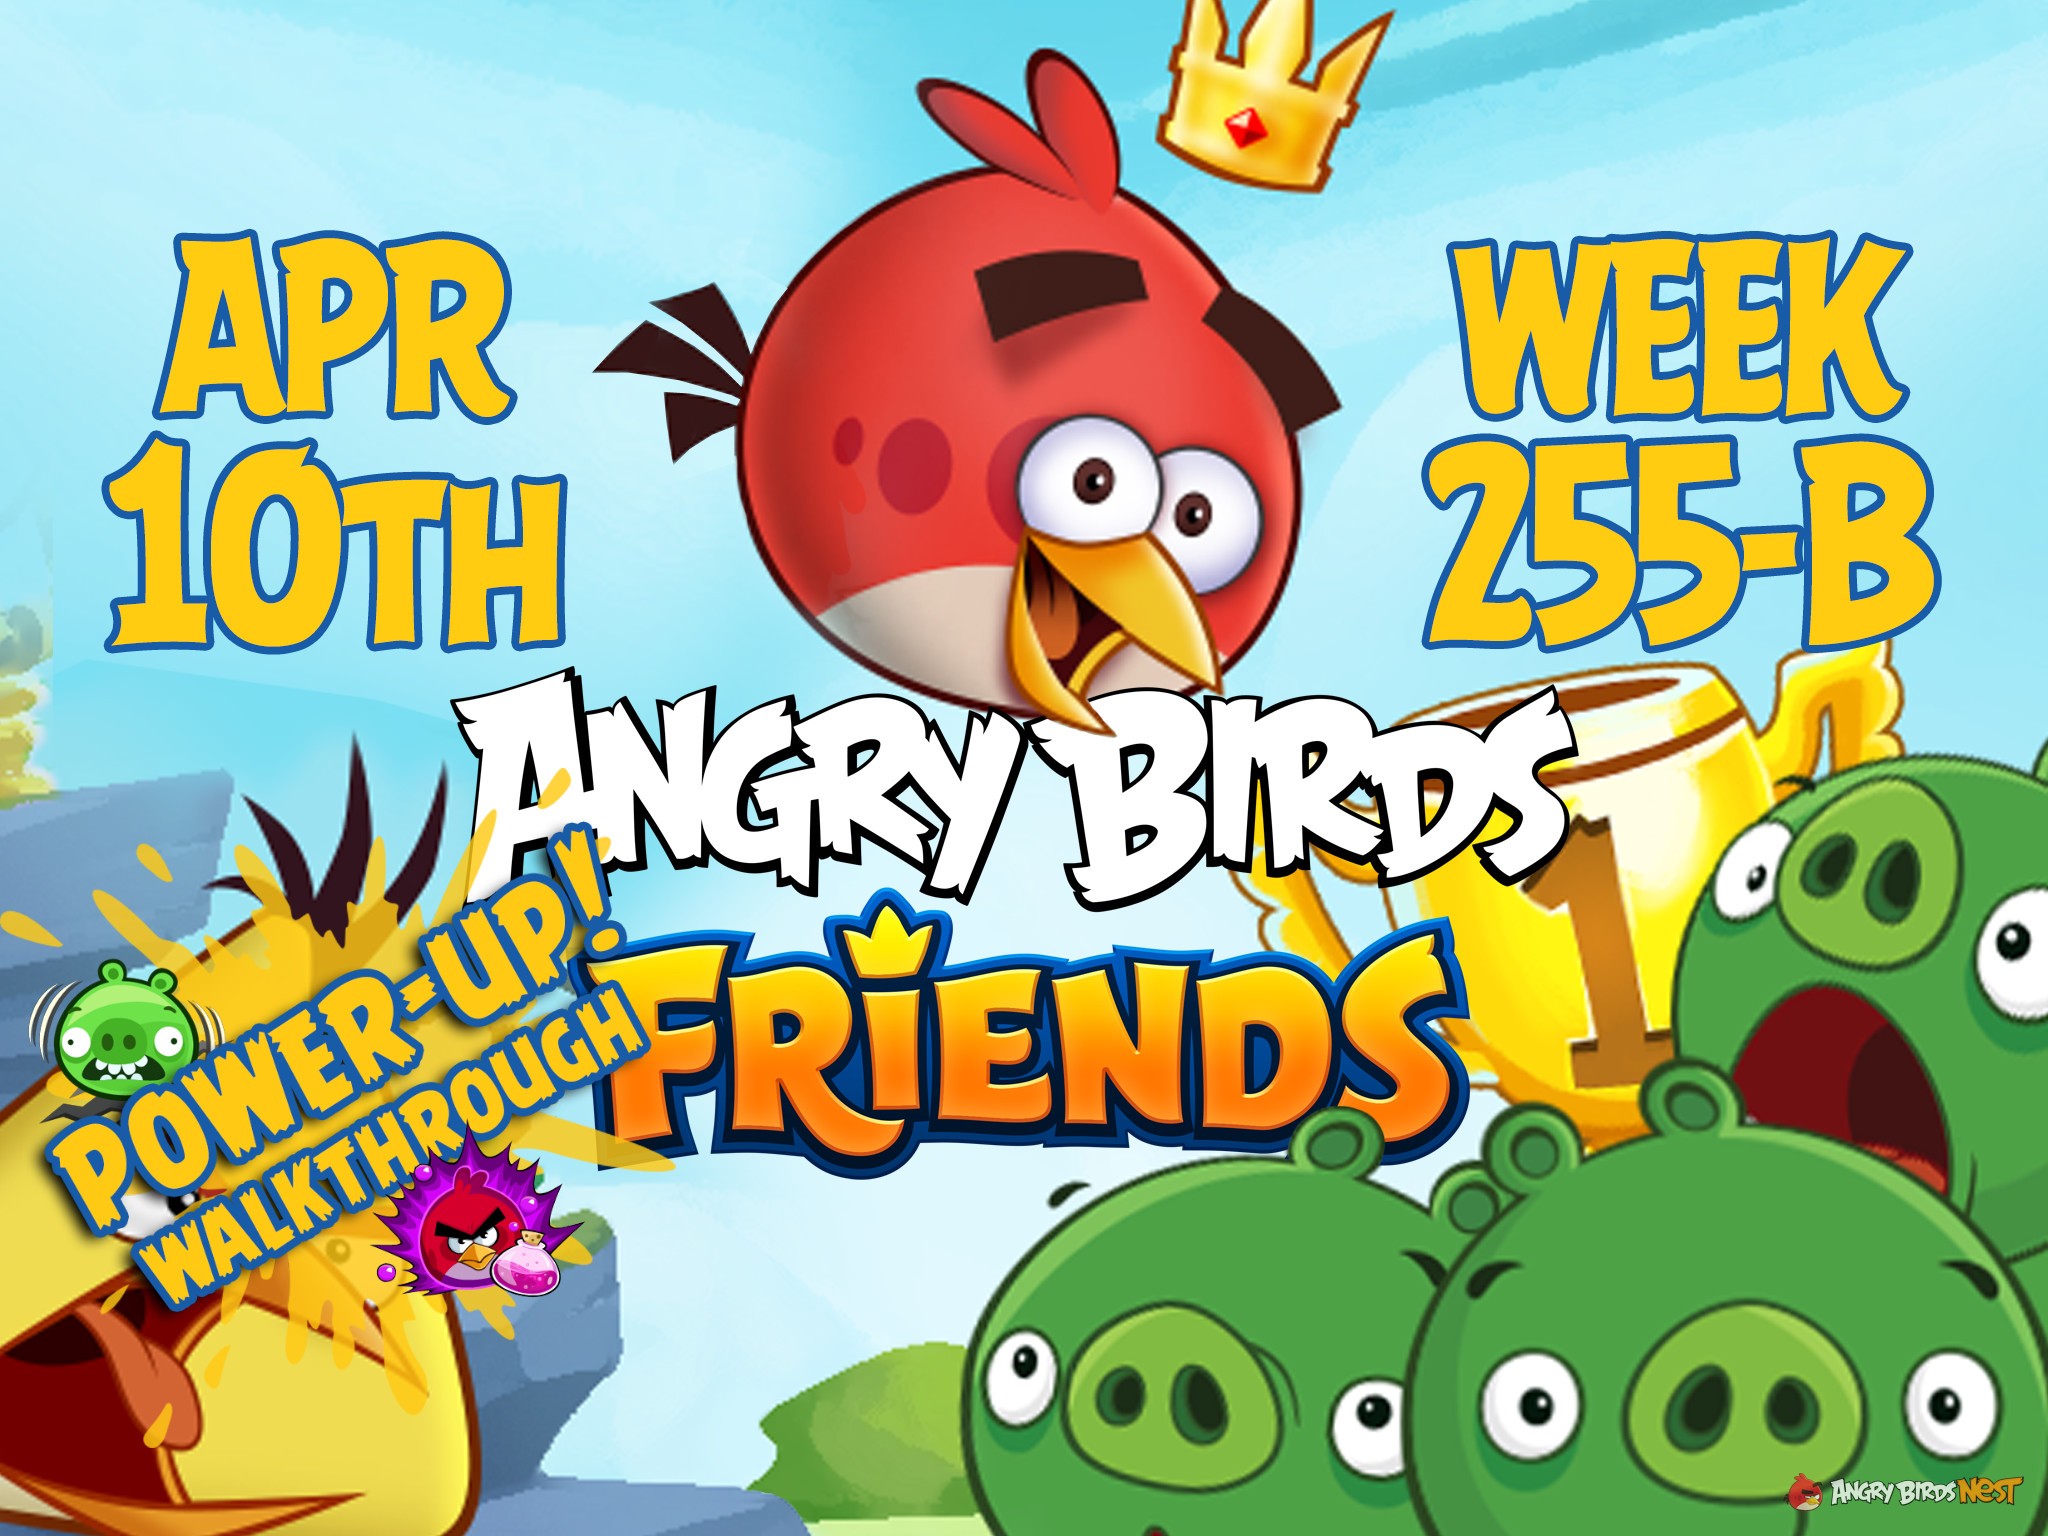 Angry Birds Friends Tournament Week 255-B Feature Image PU